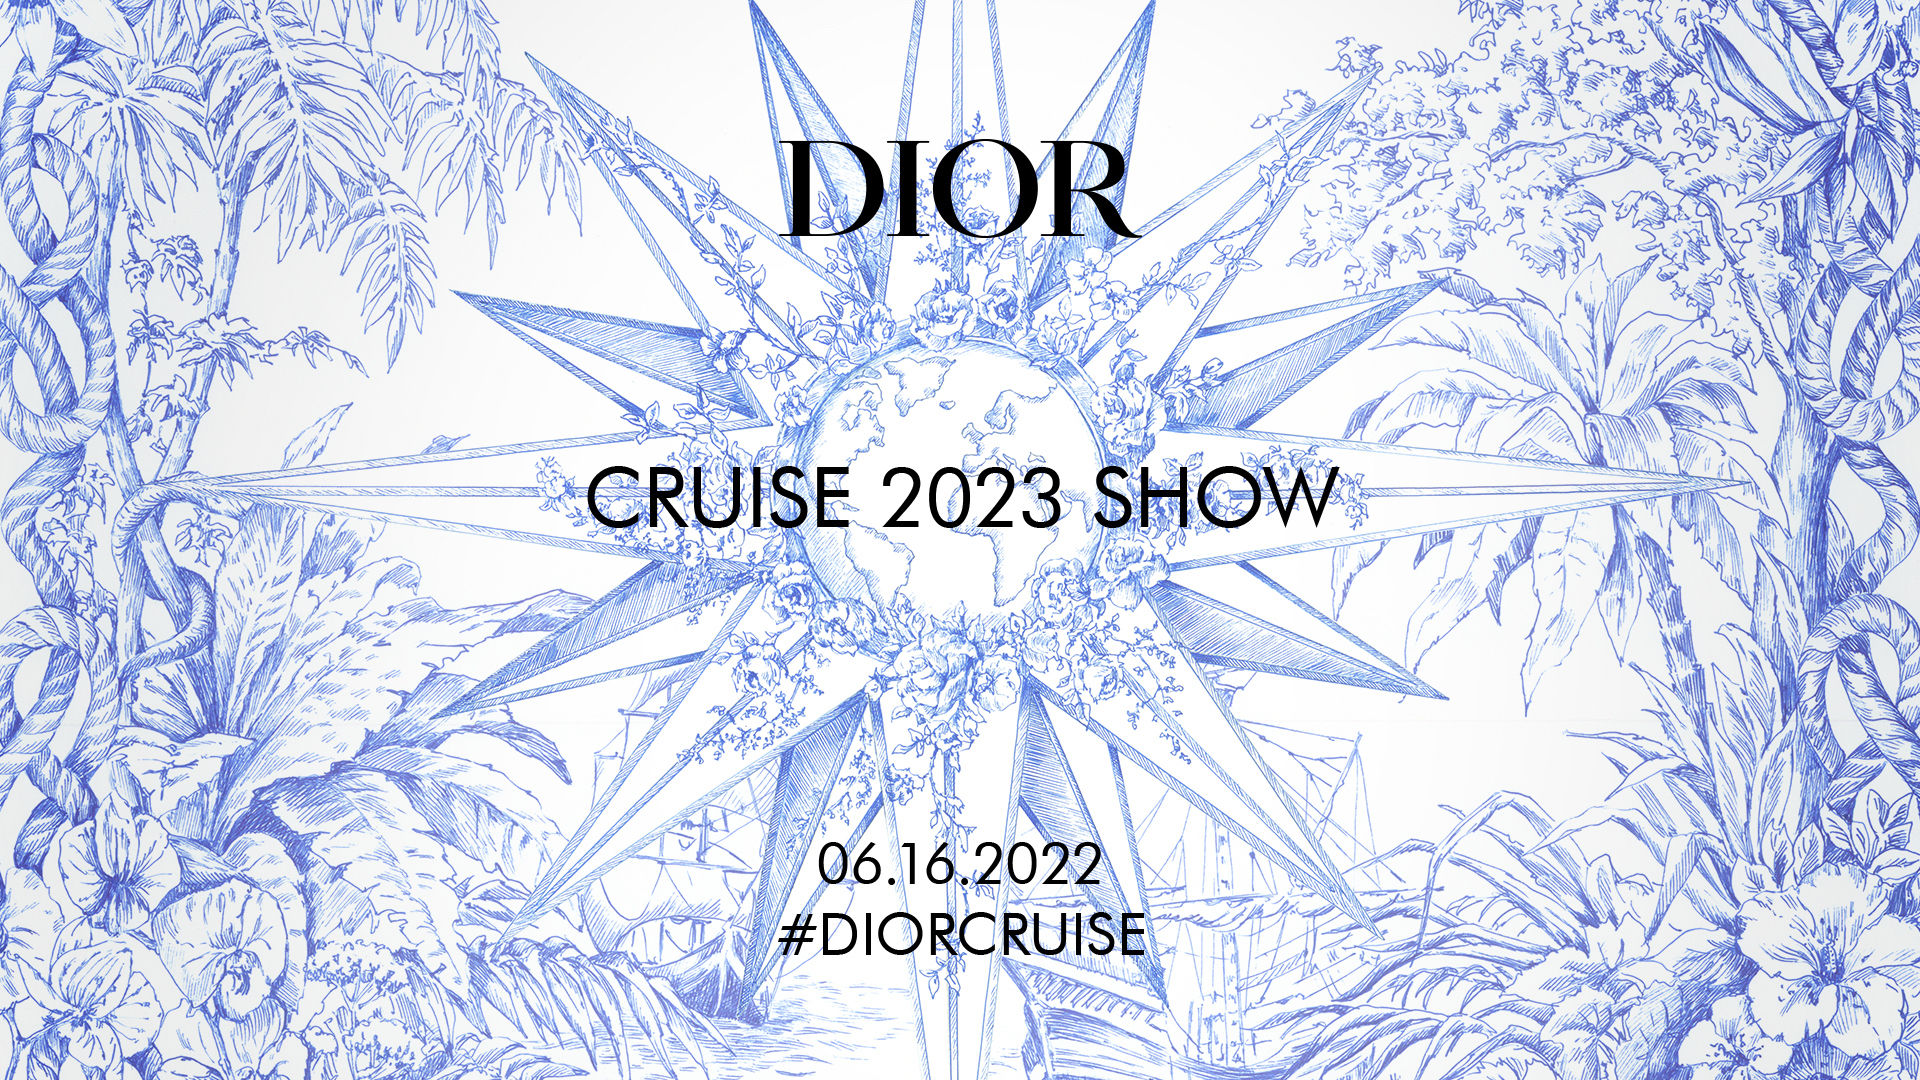 Elevating the Dior Cruise 2023 show experience with music and dance   YouTube